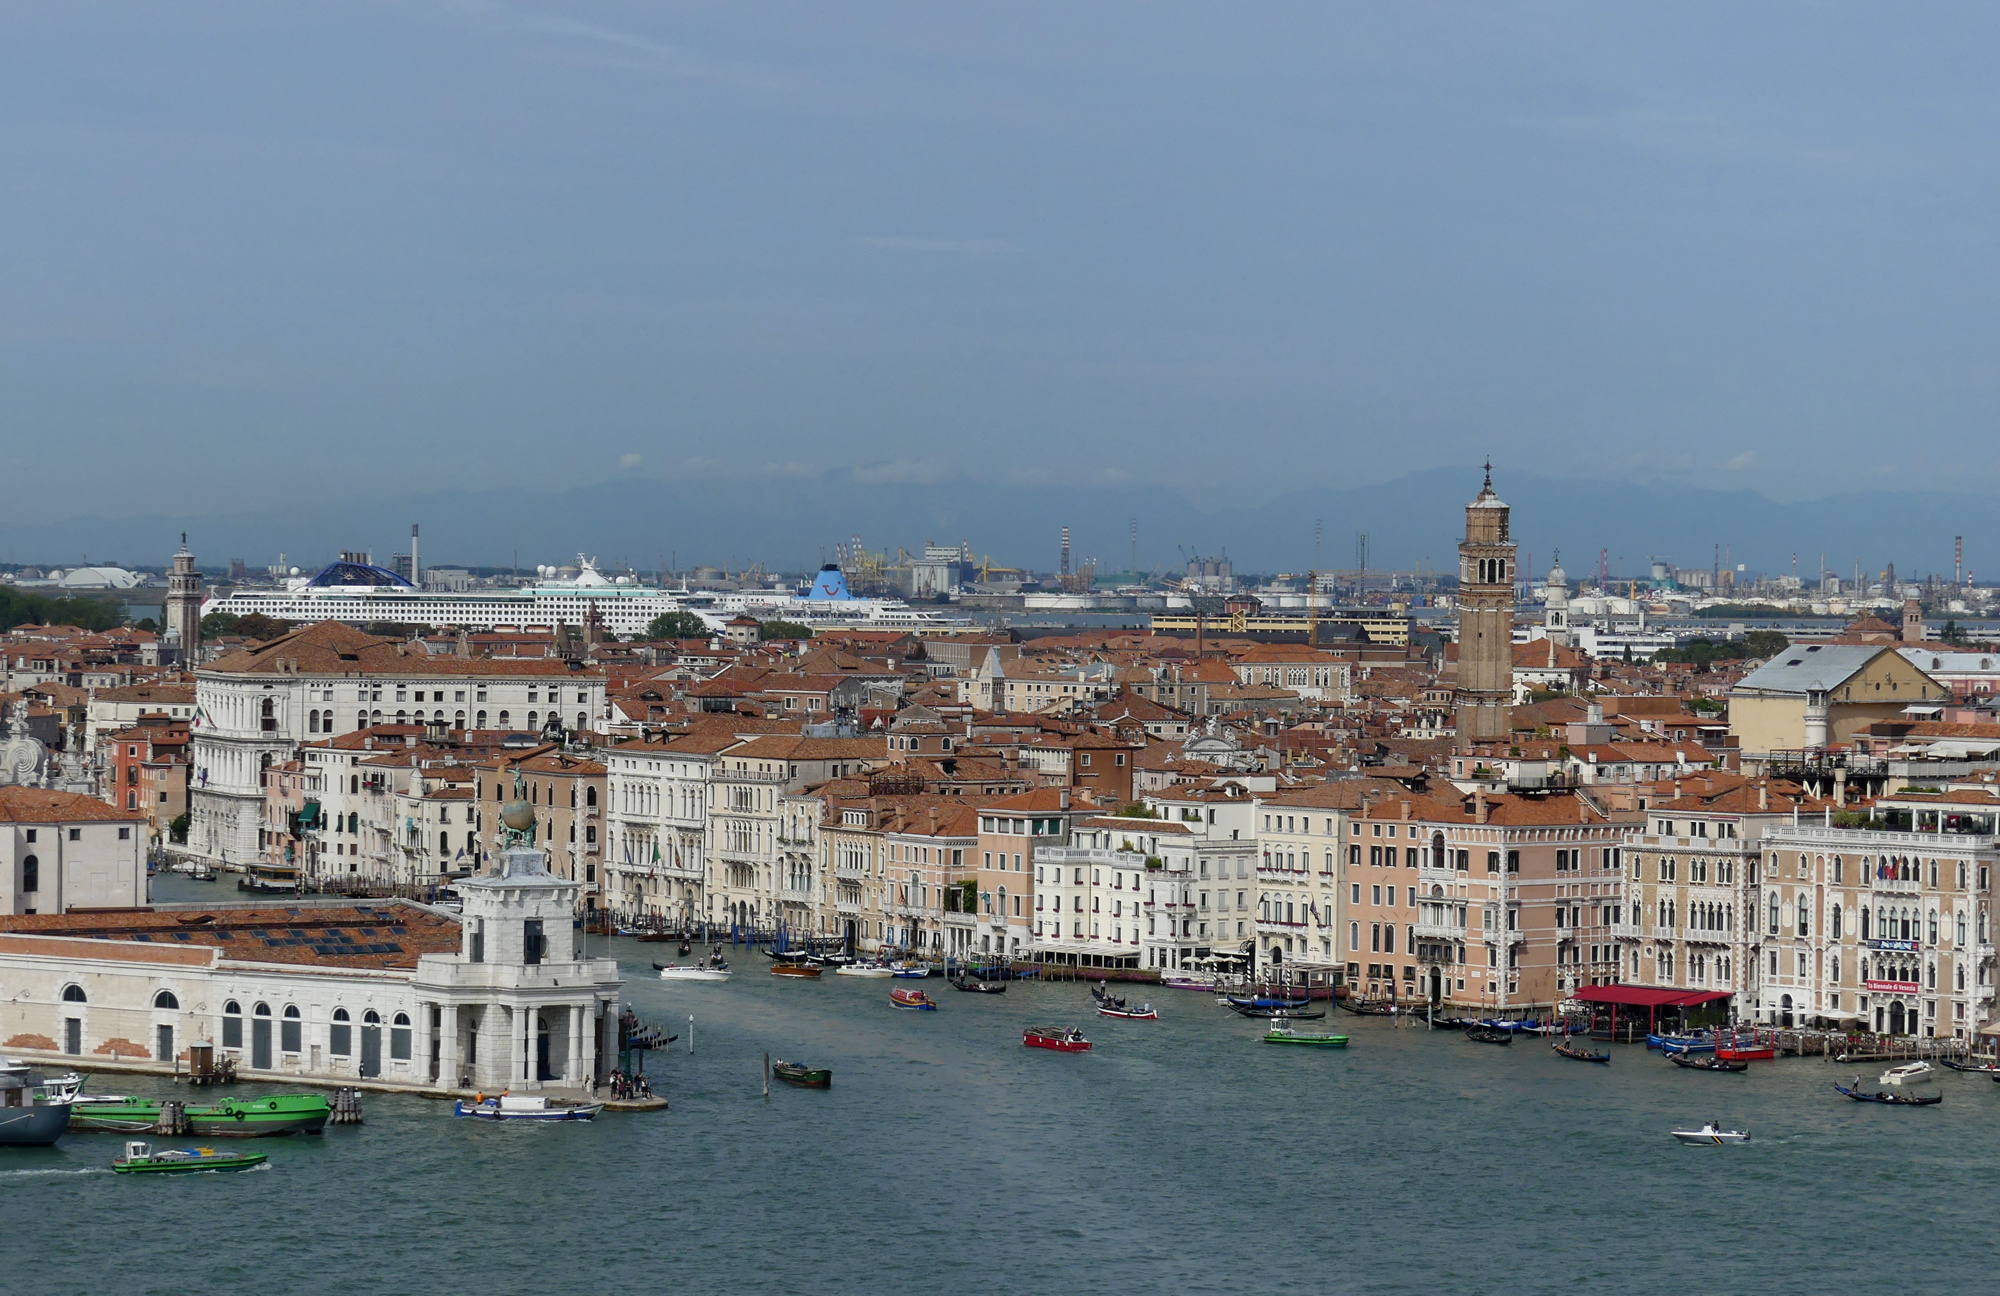 view-from-san-giorgio-tower-1-2017.jpg